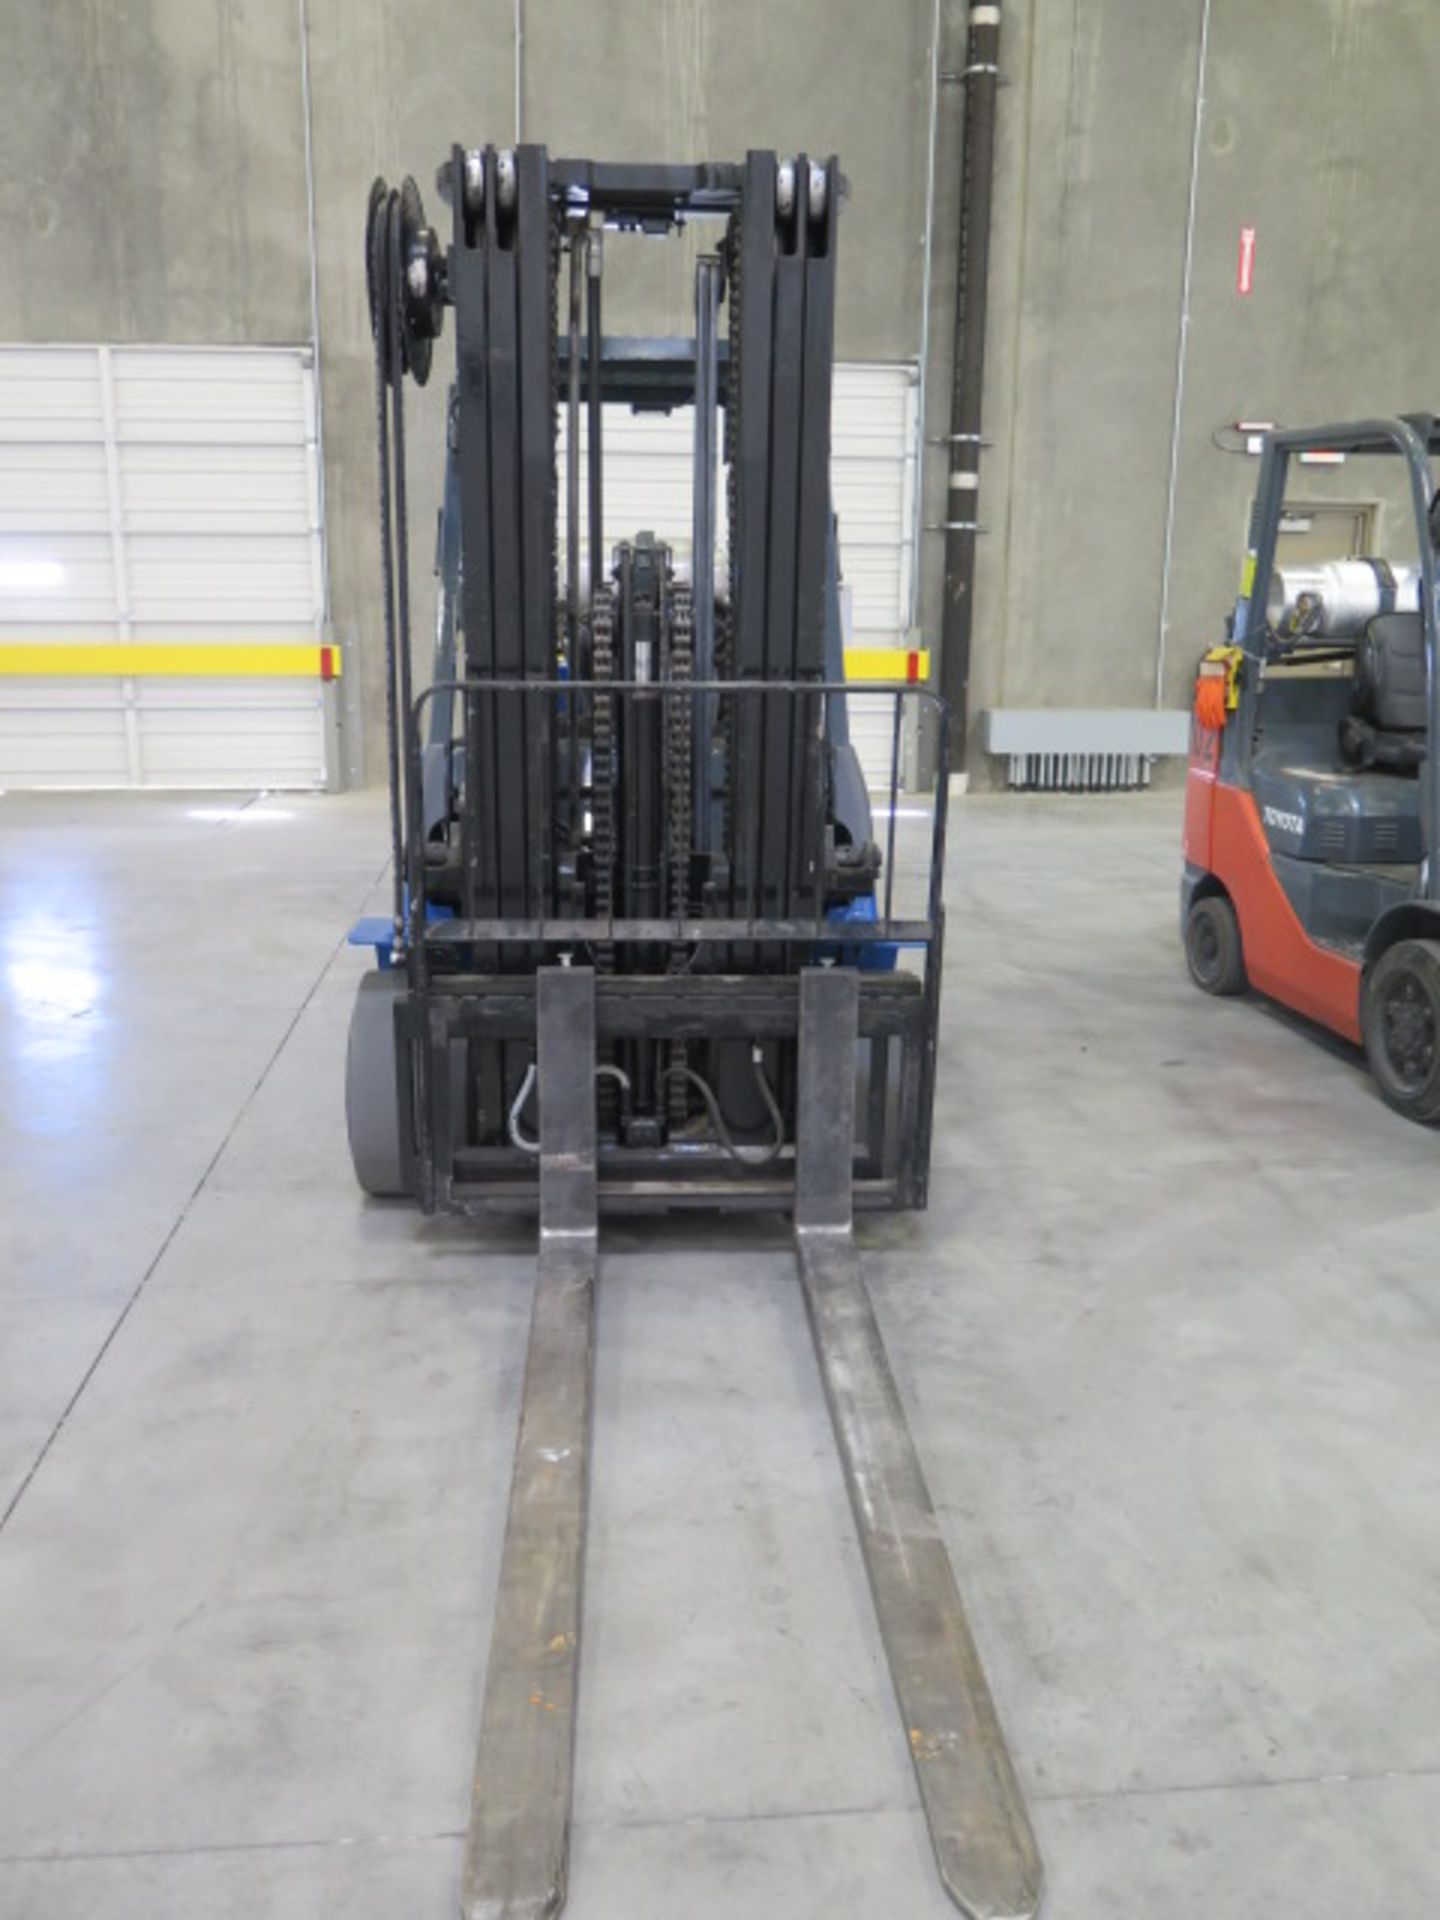 Toyota 7FGCU45 10,000 Lb Cap LPG Forklift s/n 70247 w/ 3-Stage Mast, 187” Lift height, Side Shift, - Image 3 of 13